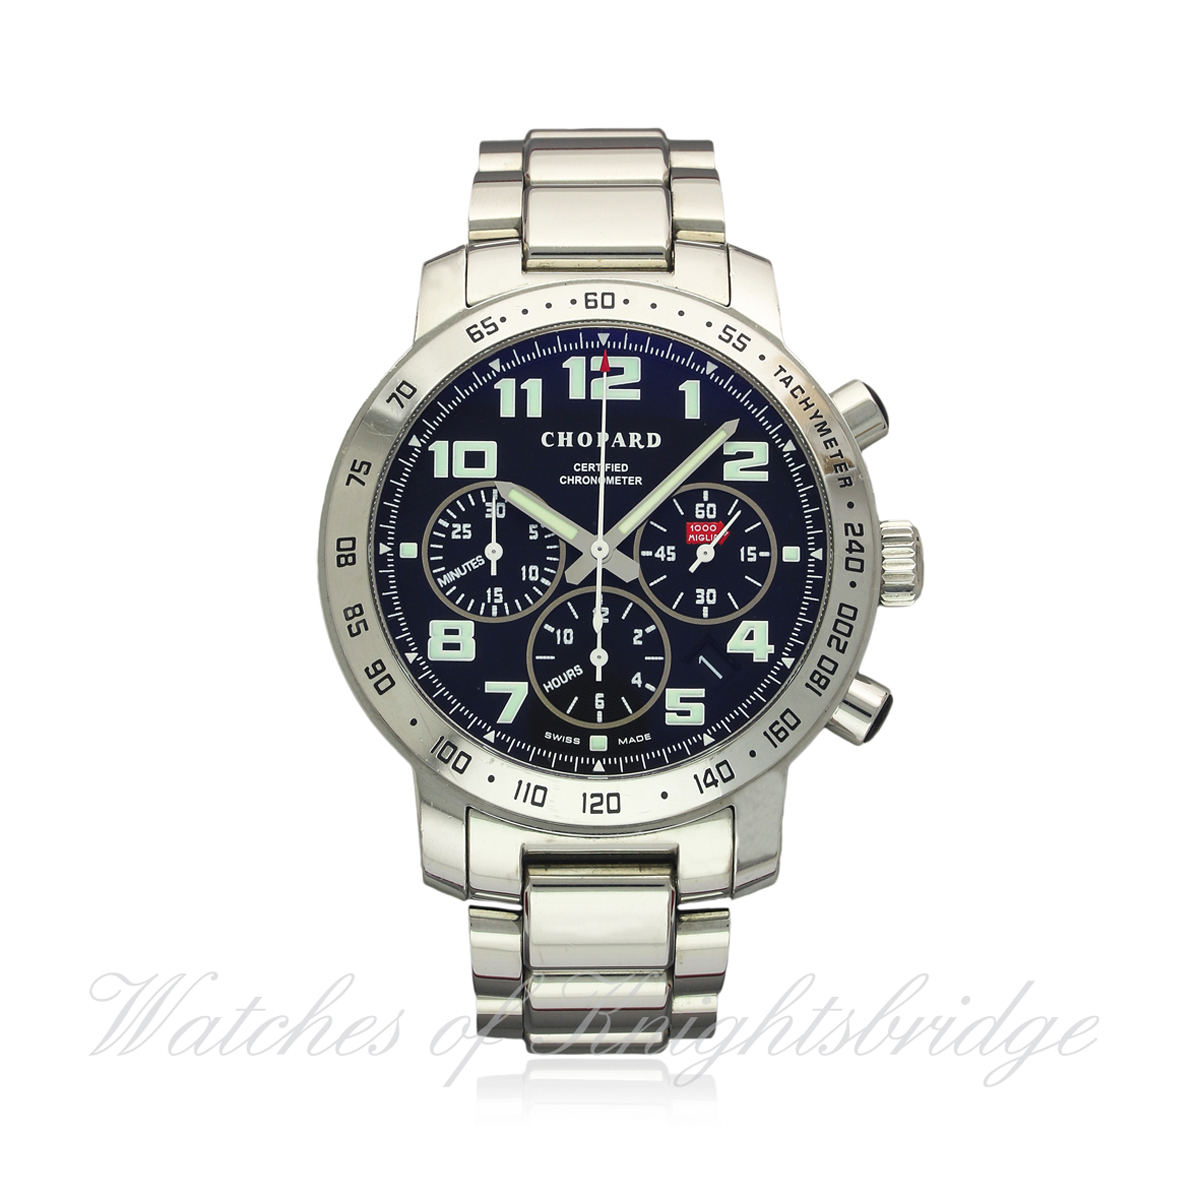 A GENTLEMAN'S STAINLESS STEEL CHOPARD MILLE MIGLIA 1000 AUTOMATIC CHRONOGRAPH BRACELET WATCH CIRCA